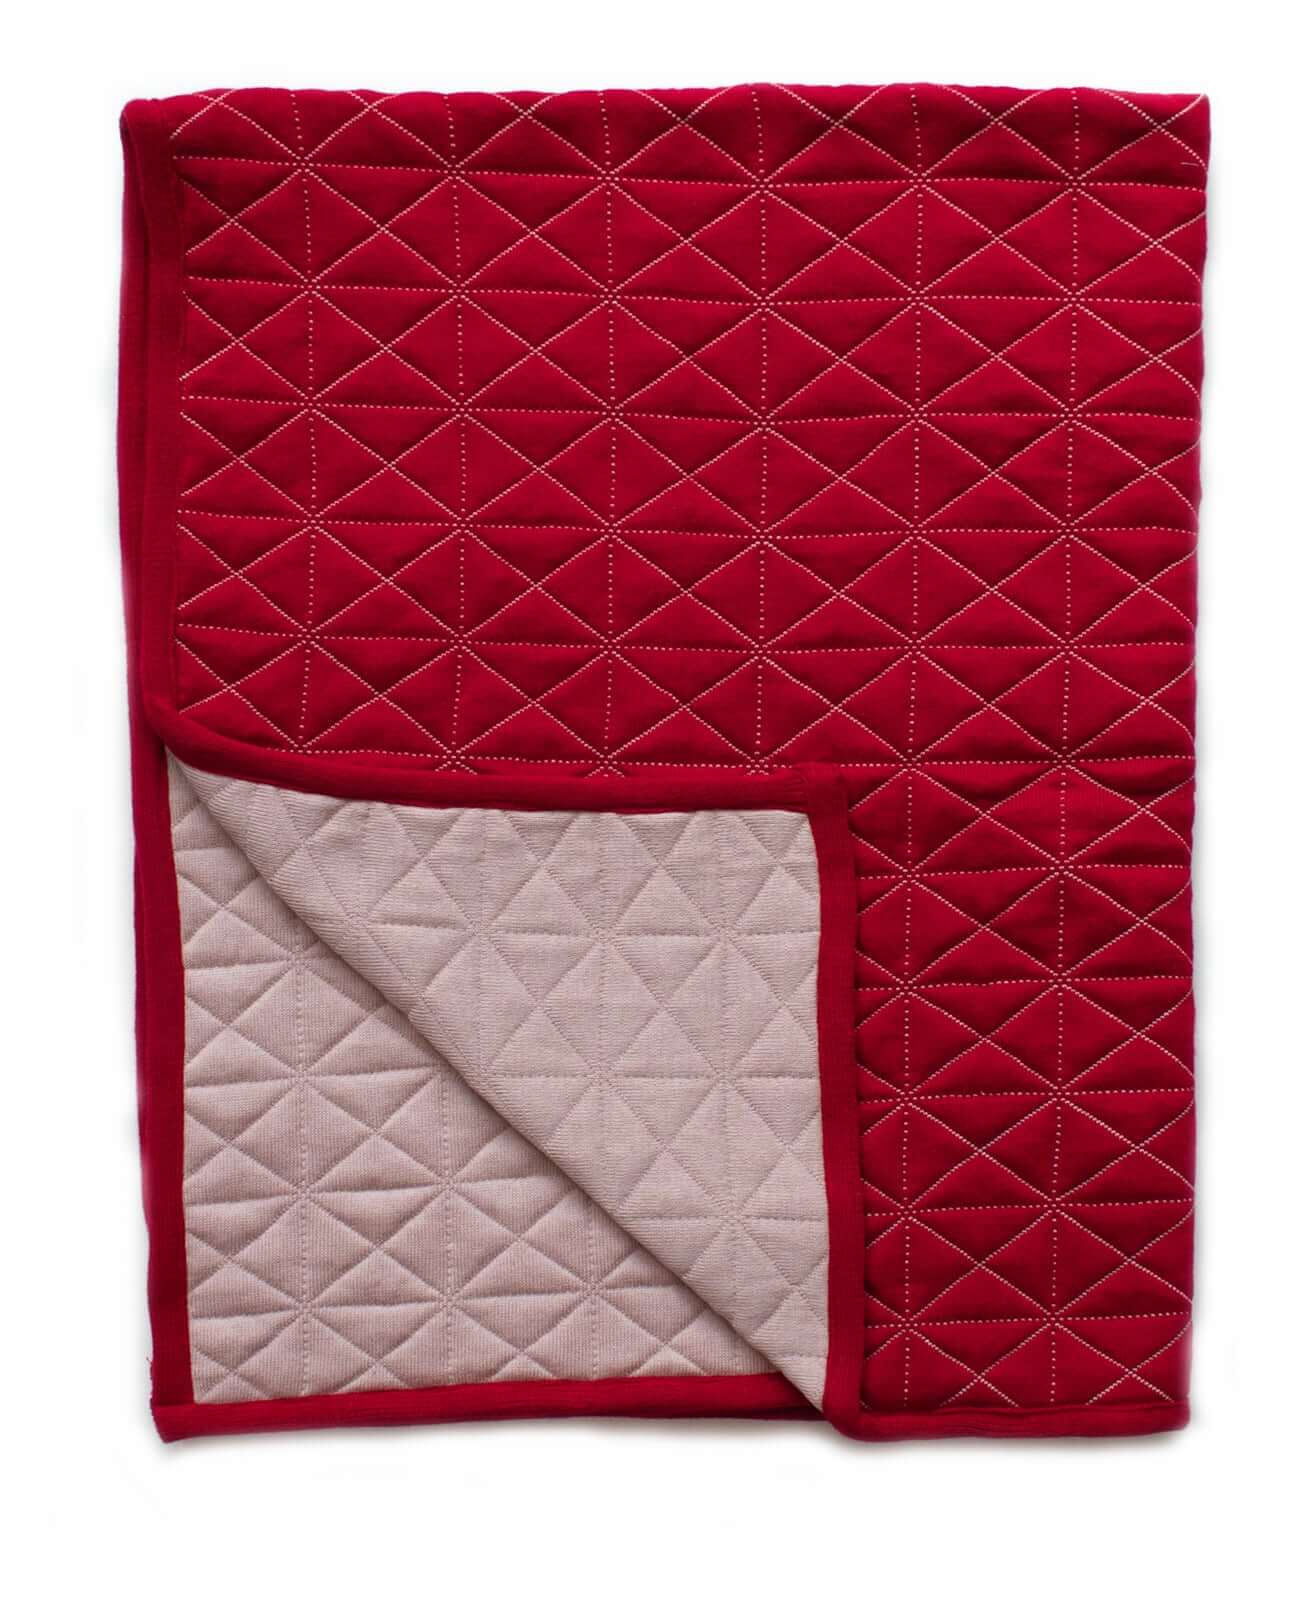 Reversible Quilted Baby Blanket - Poppy / Blush